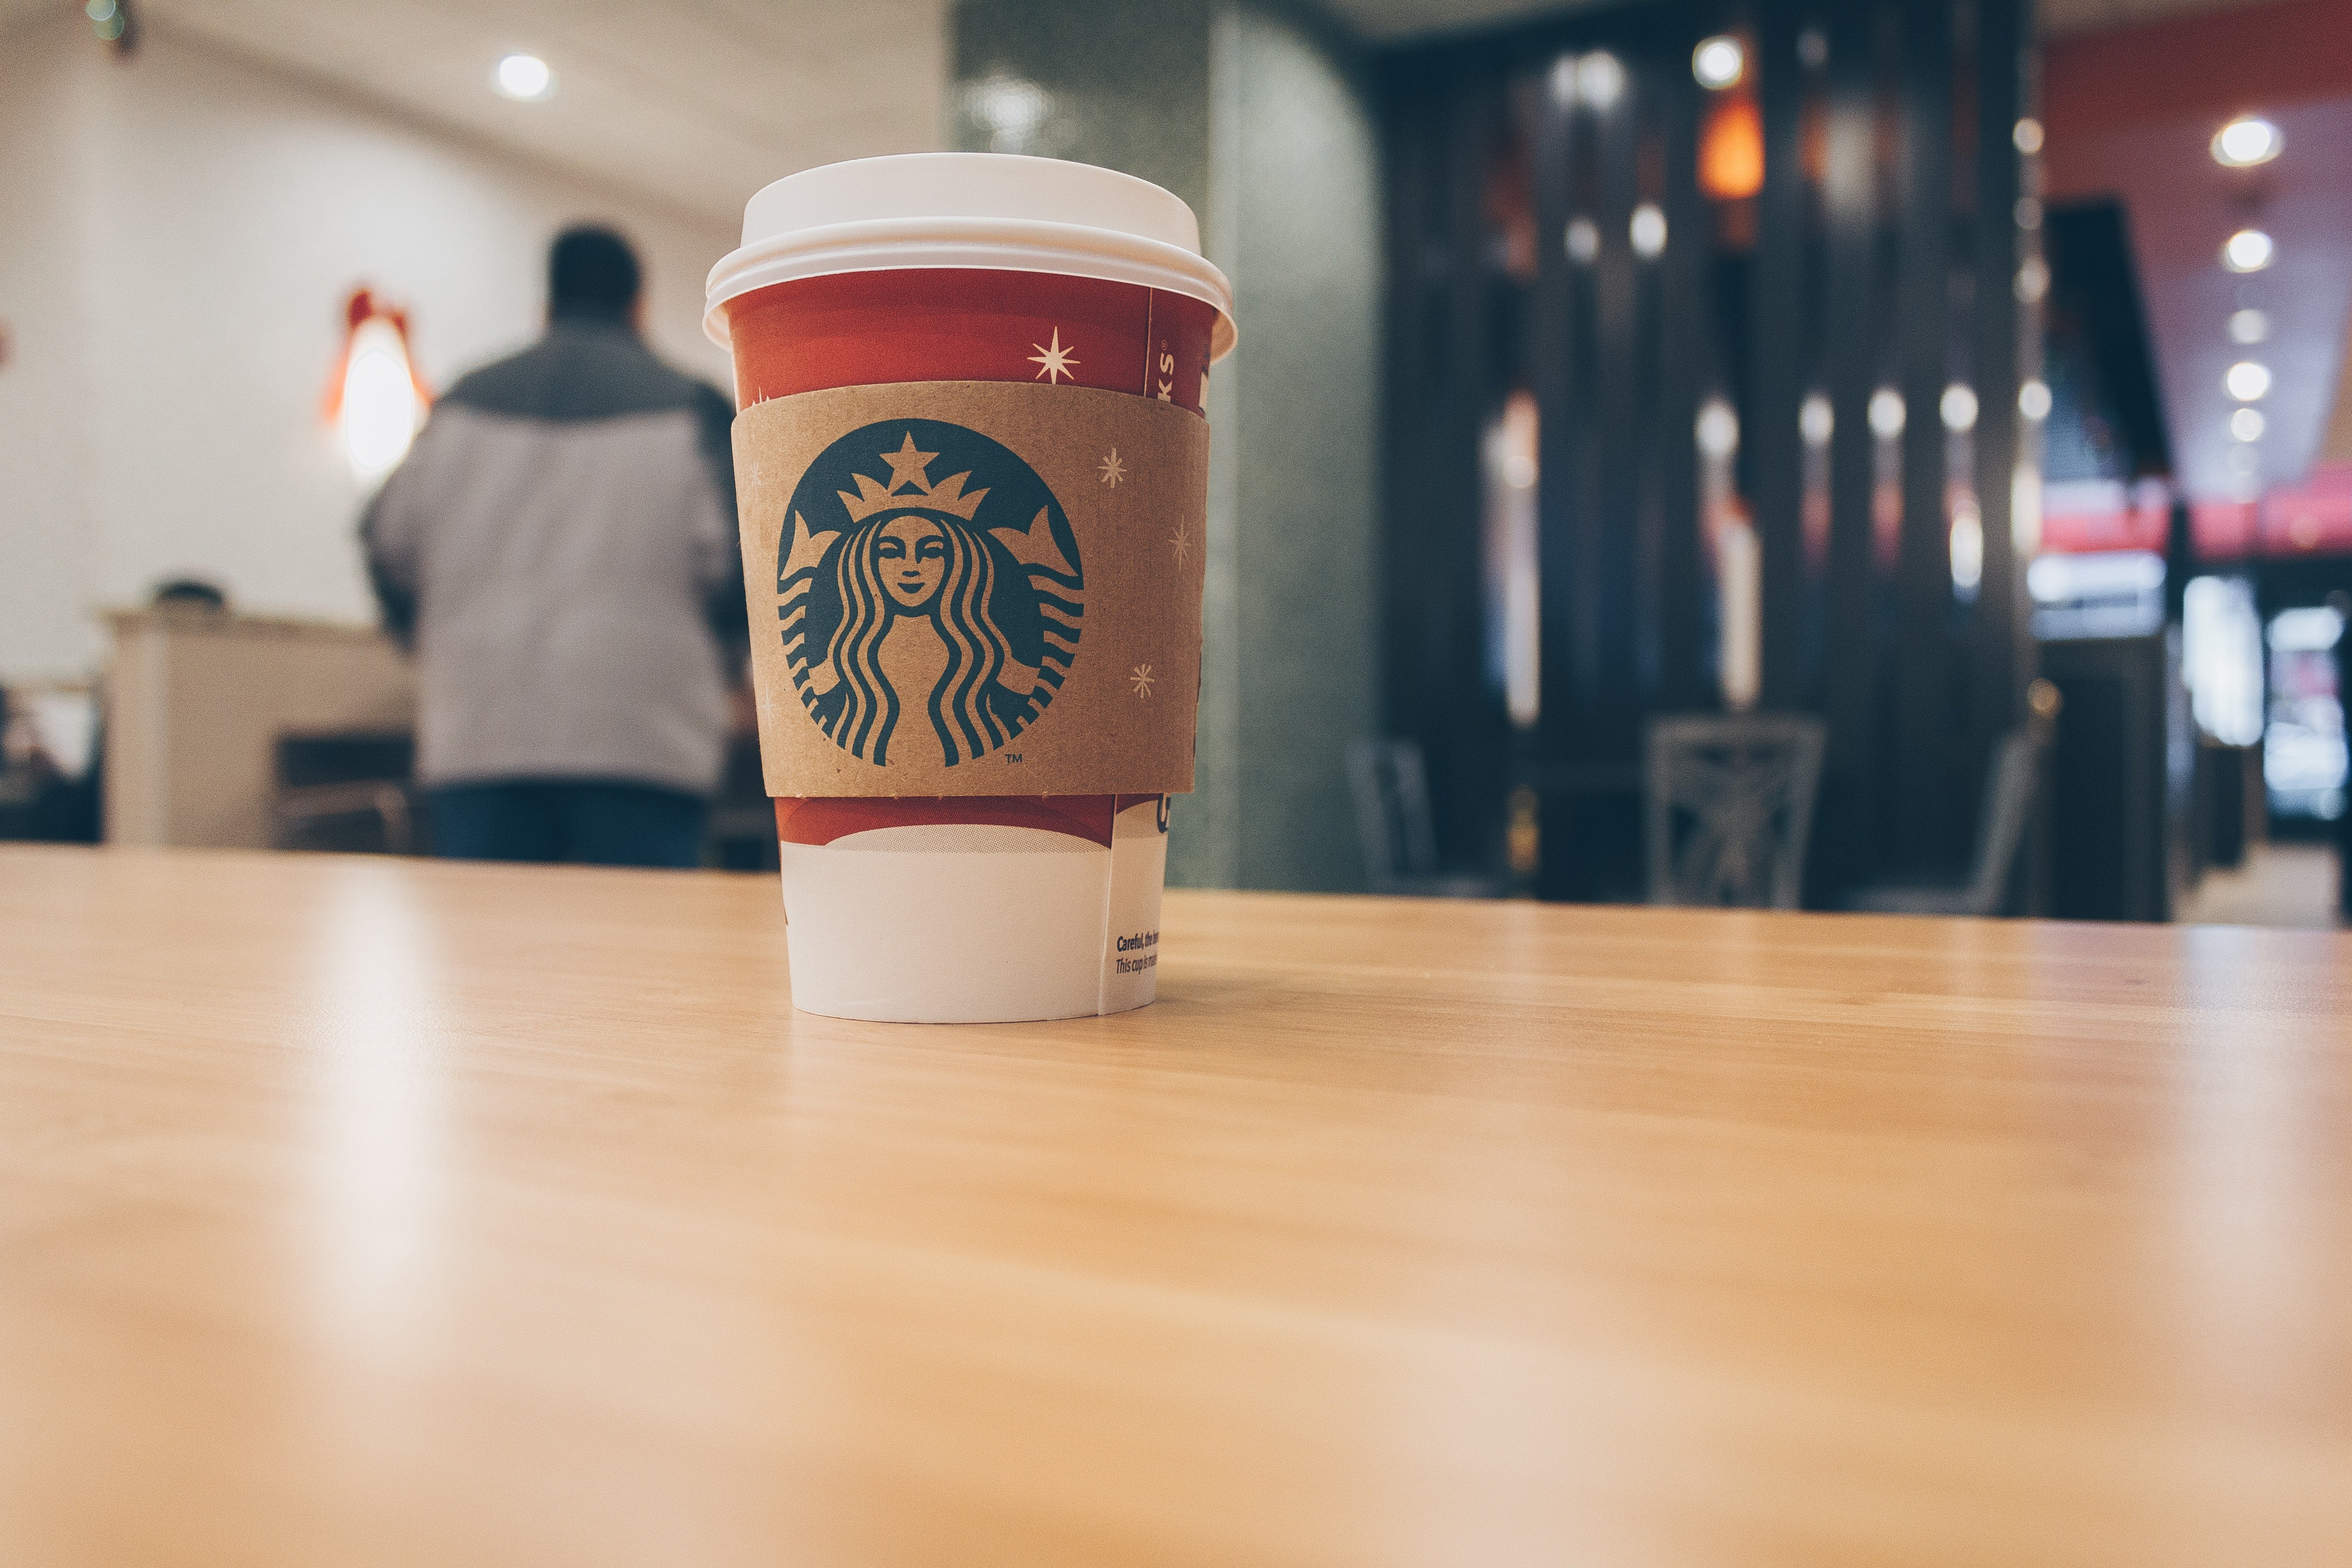 A cup of coffee from Starbucks stands on a desktop | Photo: Pexels/Josh Sorenson